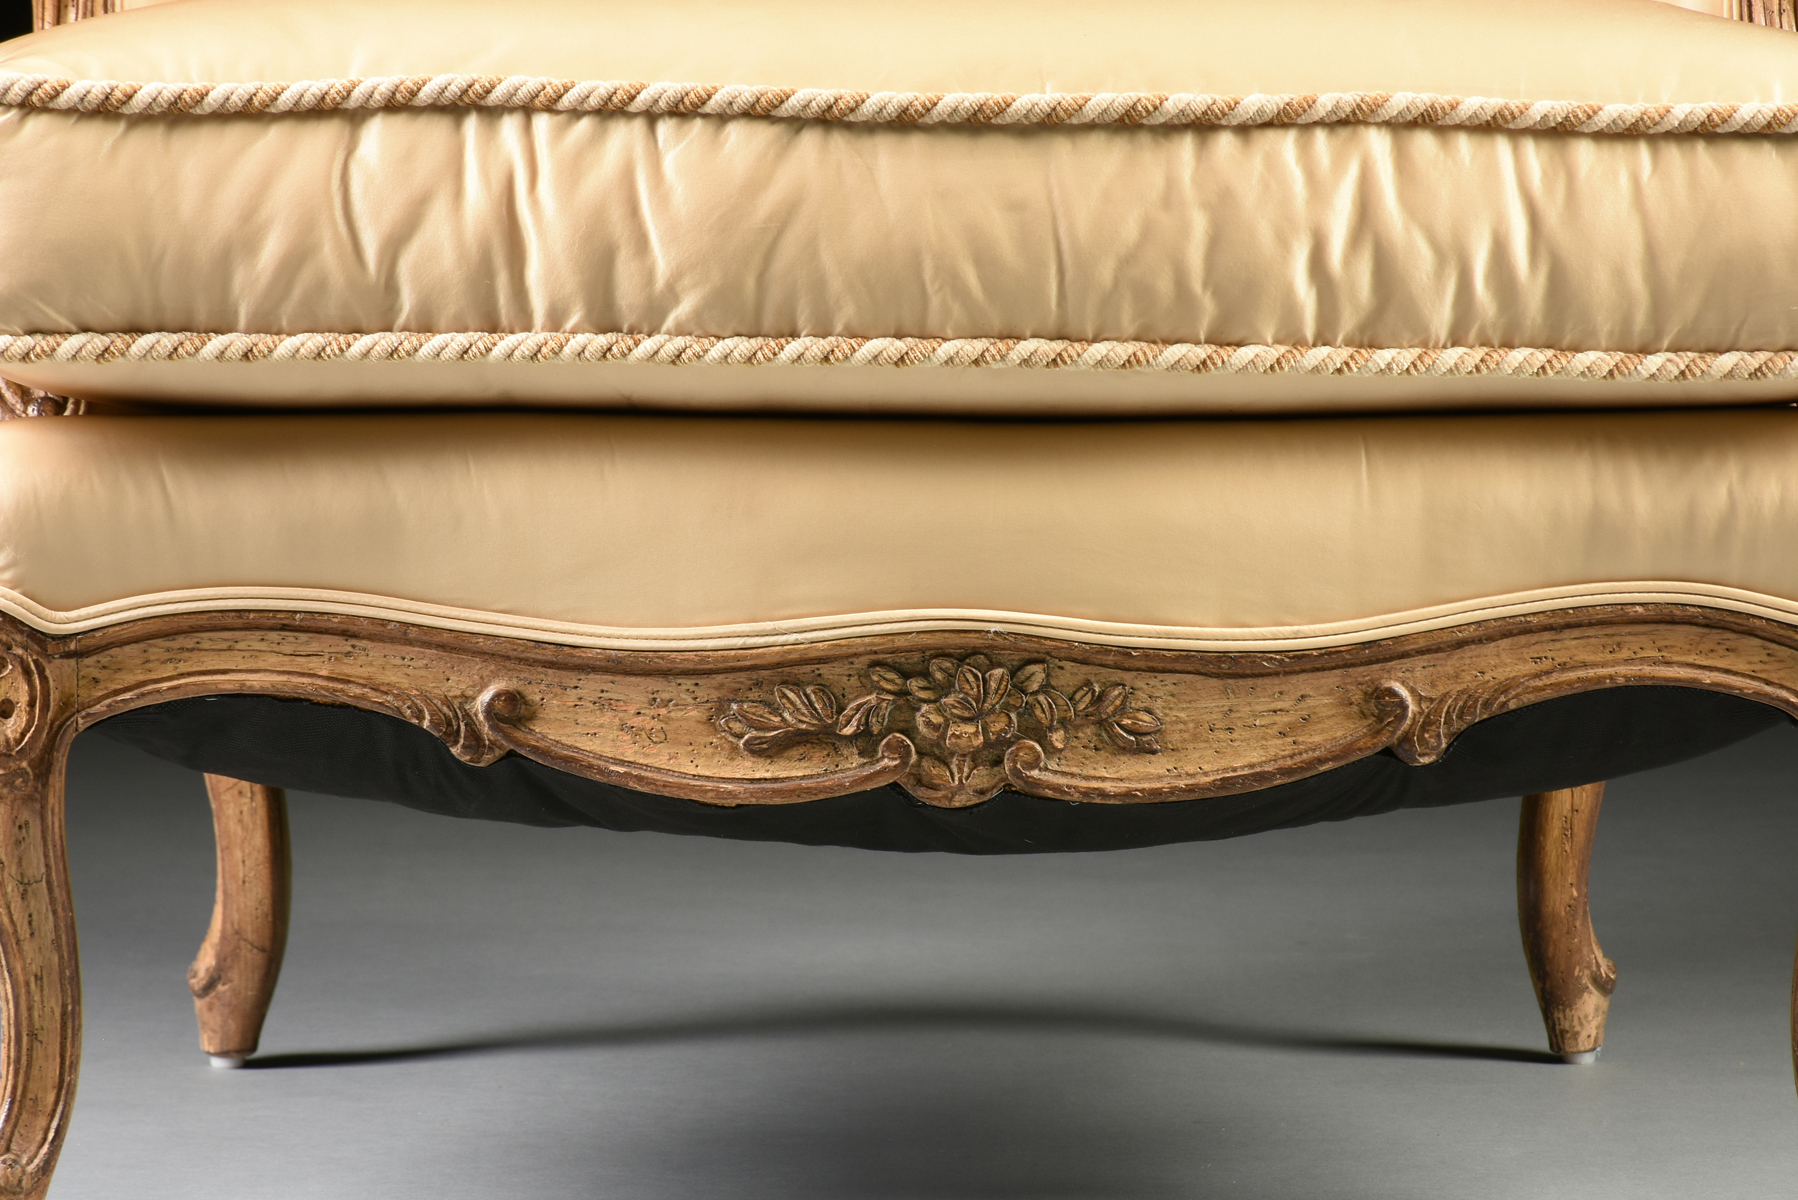 A PAIR OF LOUIS XV STYLE PAINTED AND CARVED WOOD BERGÉRES, 20TH CENTURY, each with an undulating - Image 6 of 10